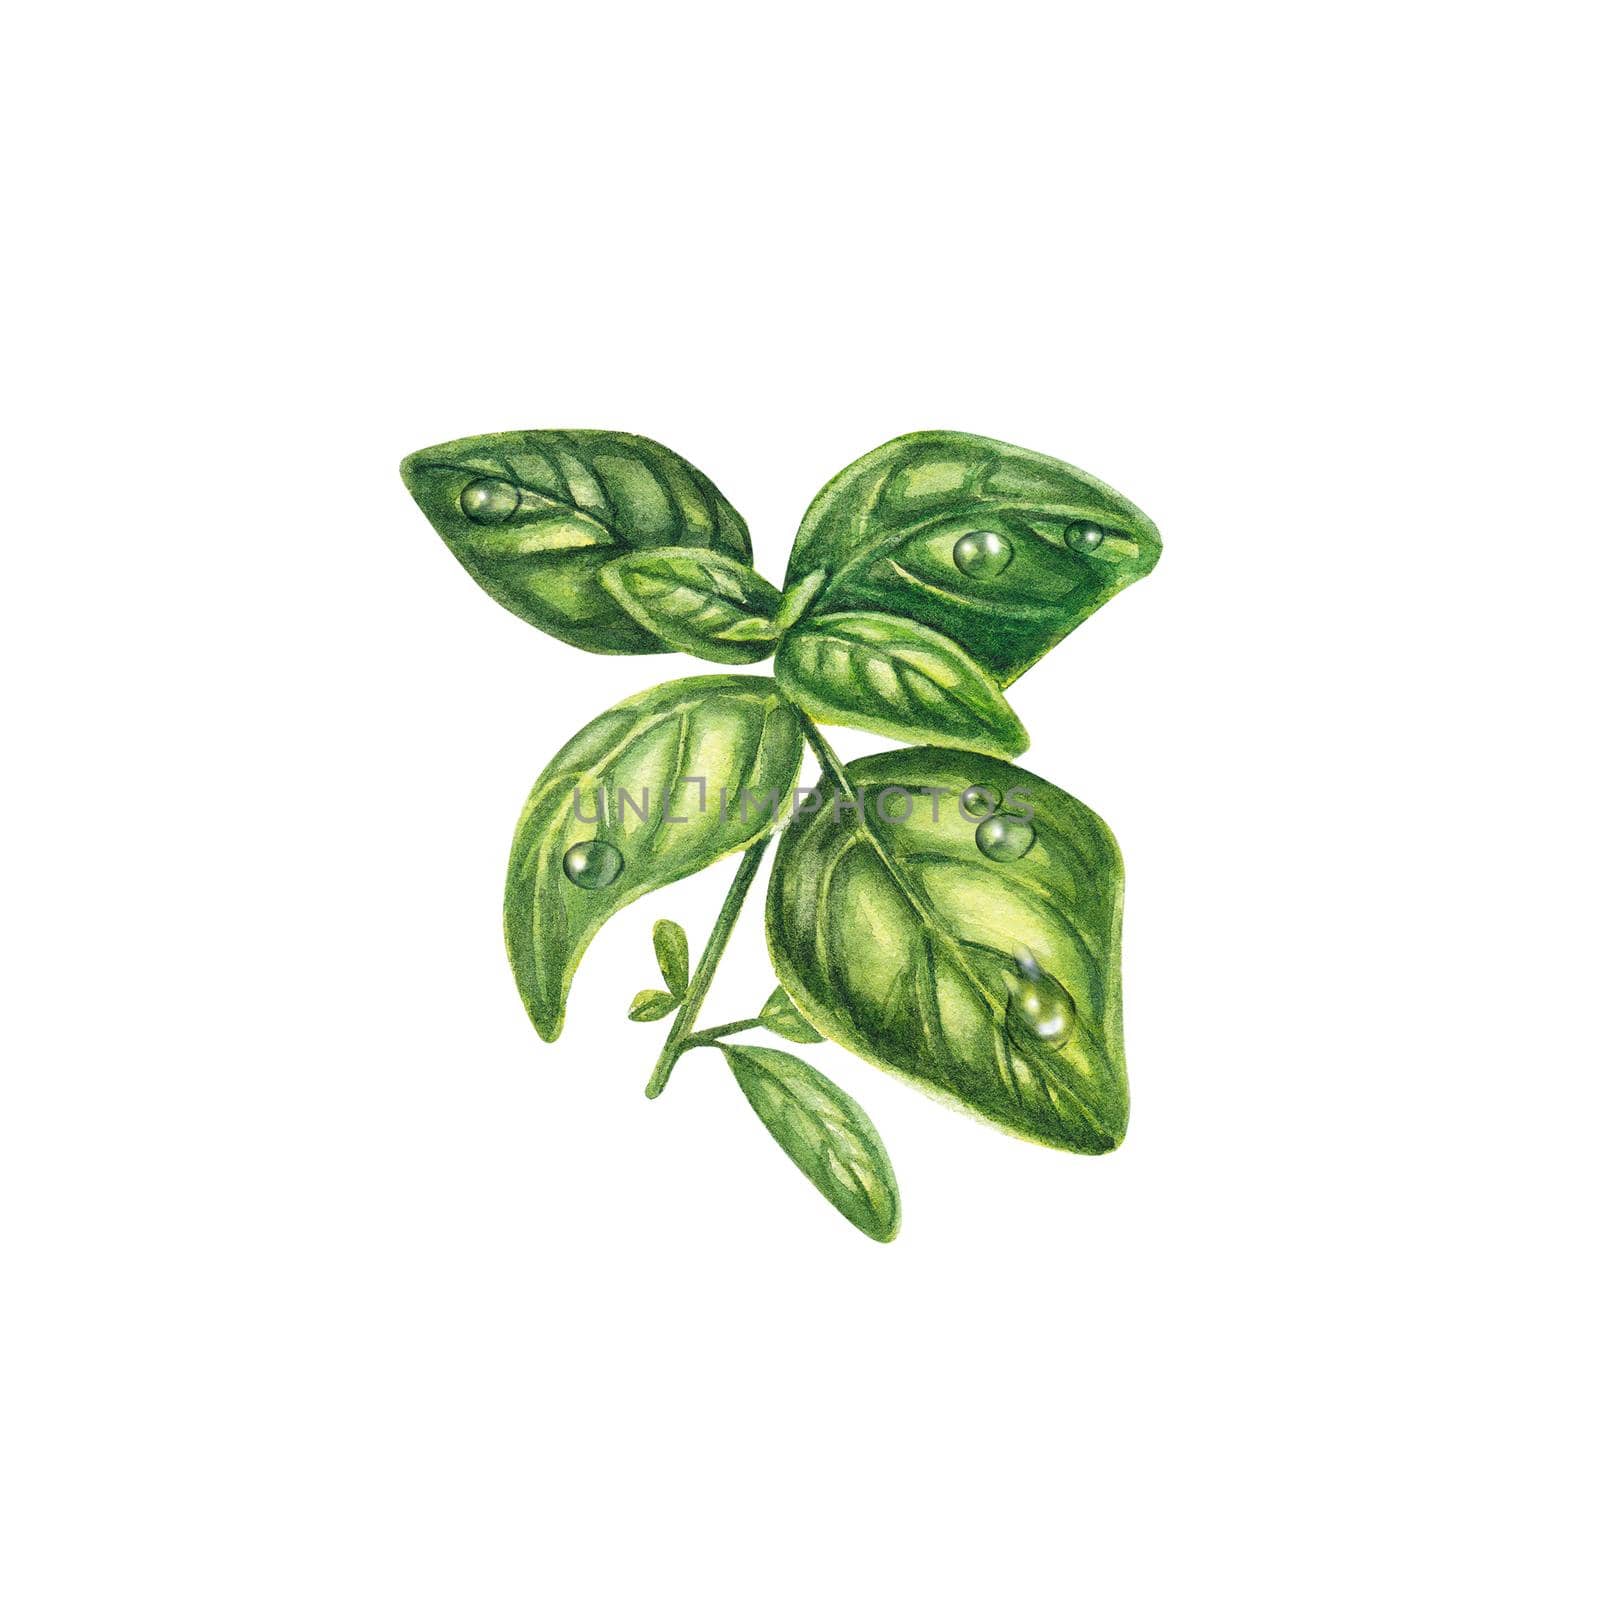 Basil in watercolor on a white background. A sprig of basil with drops of water. Fresh Provencal herbs and spices for cooking. Realistic plants. The illustration is suitable for design, invitations. by NastyaChe